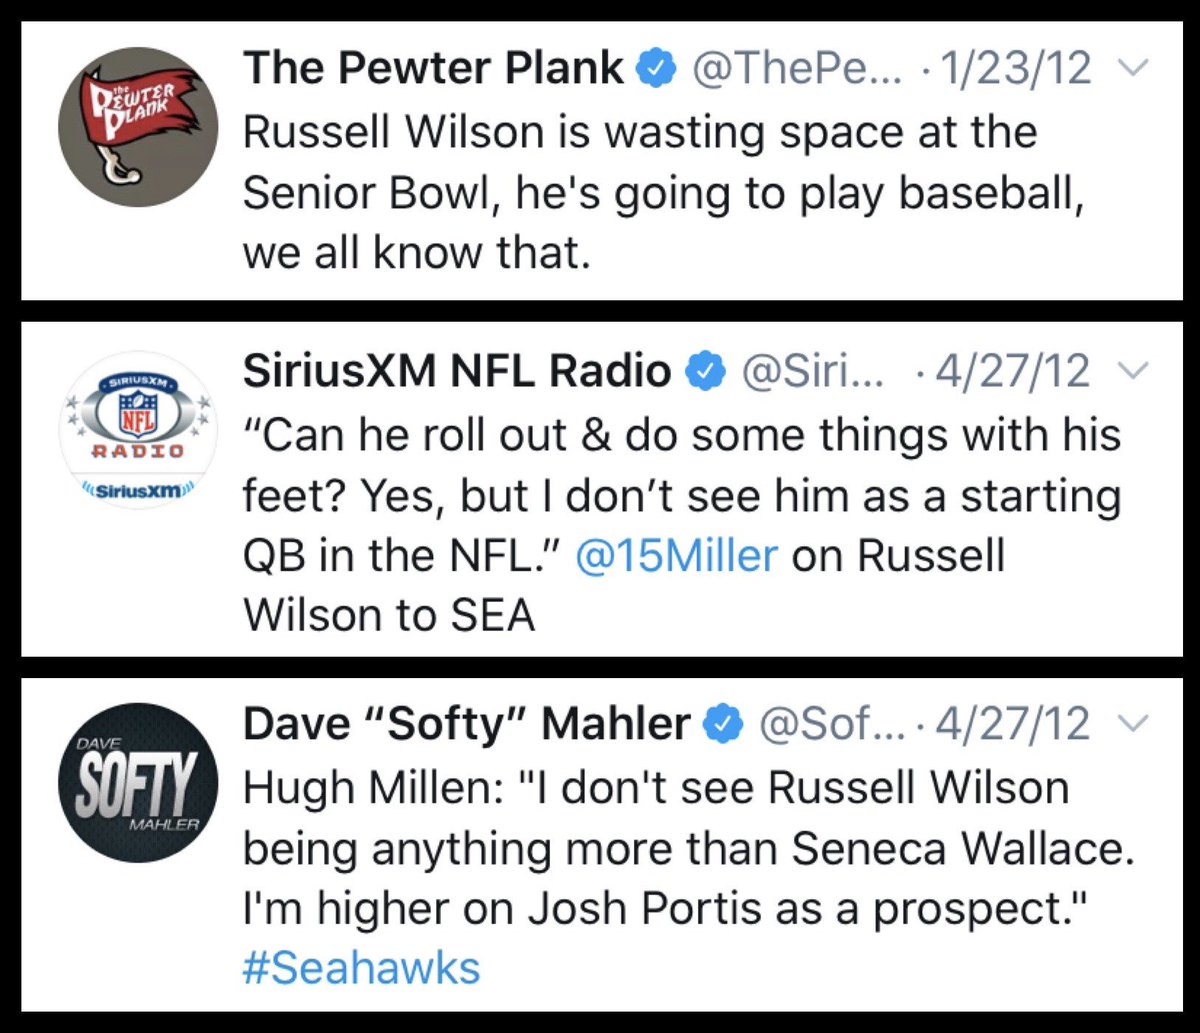 Russell Wilson (2012)Included is the infamous B/R Article giving the Seahawks an F for the 2012 Draft  https://bleacherreport.com/articles/1165320-2012-nfl-draft-grades-power-ranking-teams-that-failed-on-draft-day